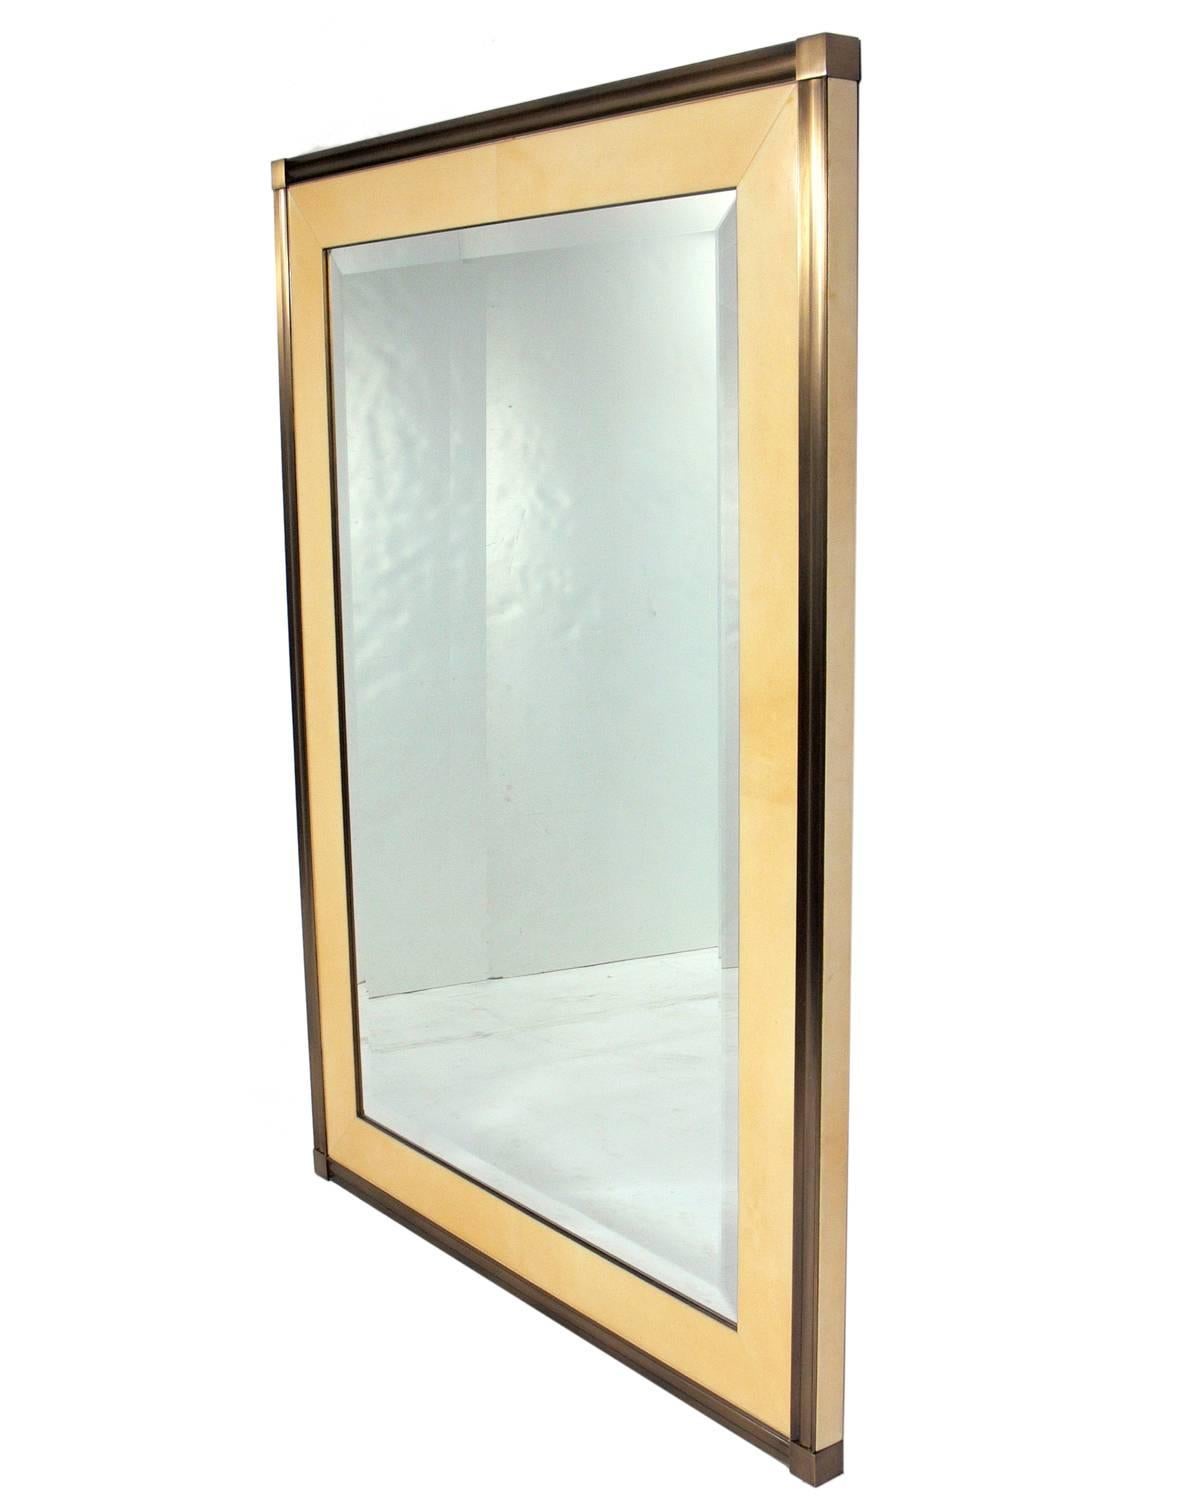 Large-scale brushed bronze and lacquered goatskin mirror, custom-made for Lorin Marsh, circa 1990s. It measures an impressive 65